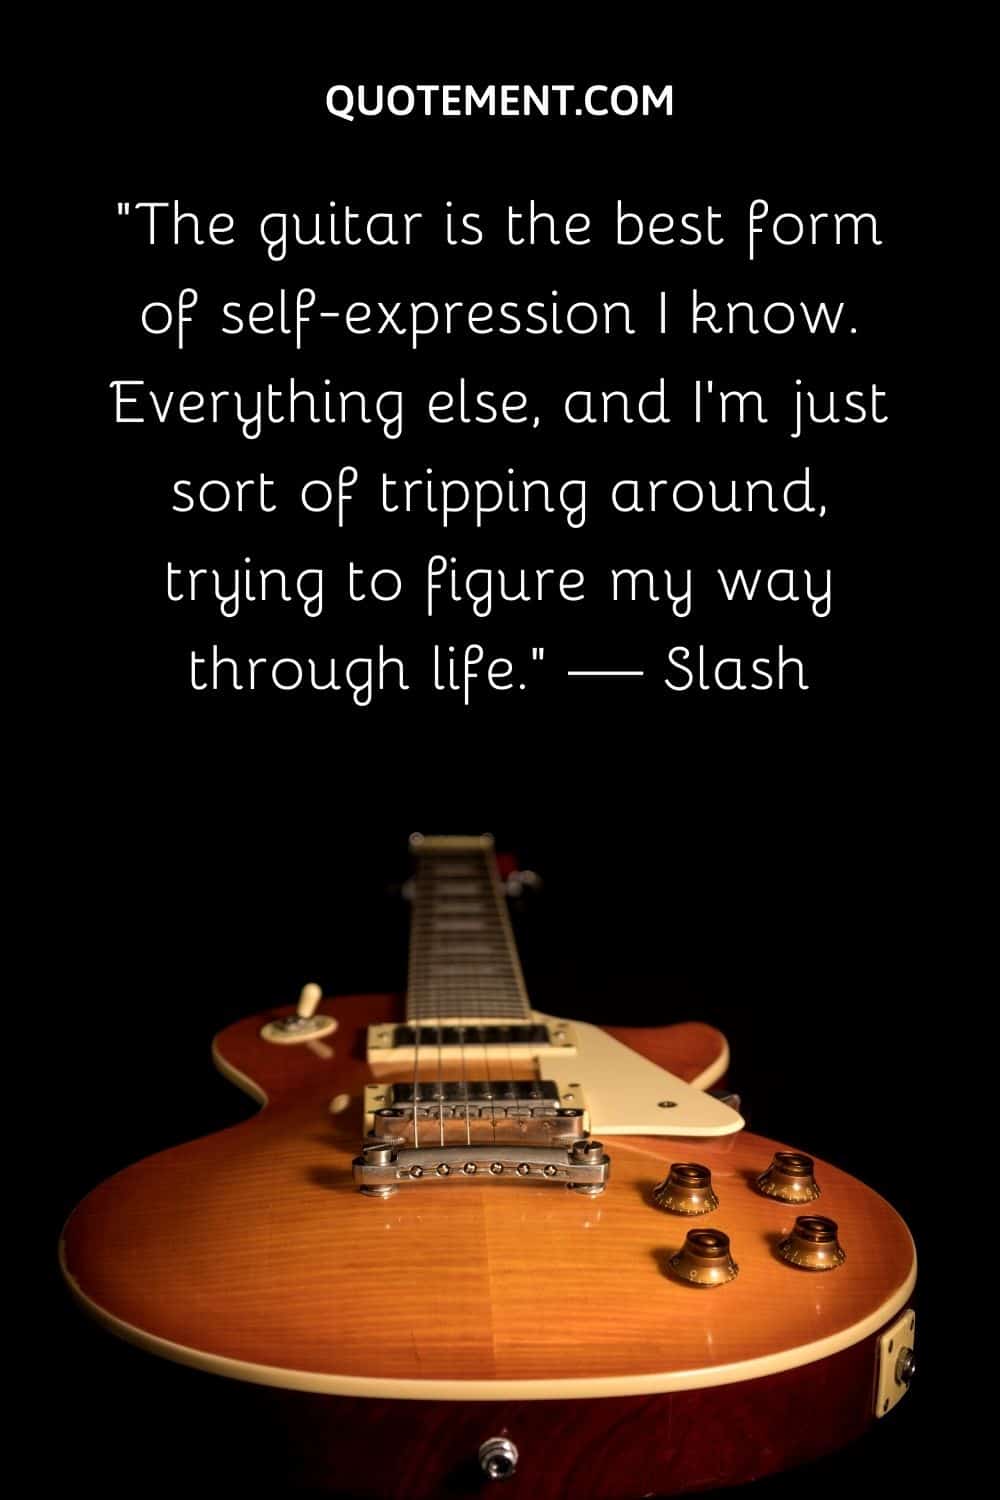 The guitar is the best form of self-expression